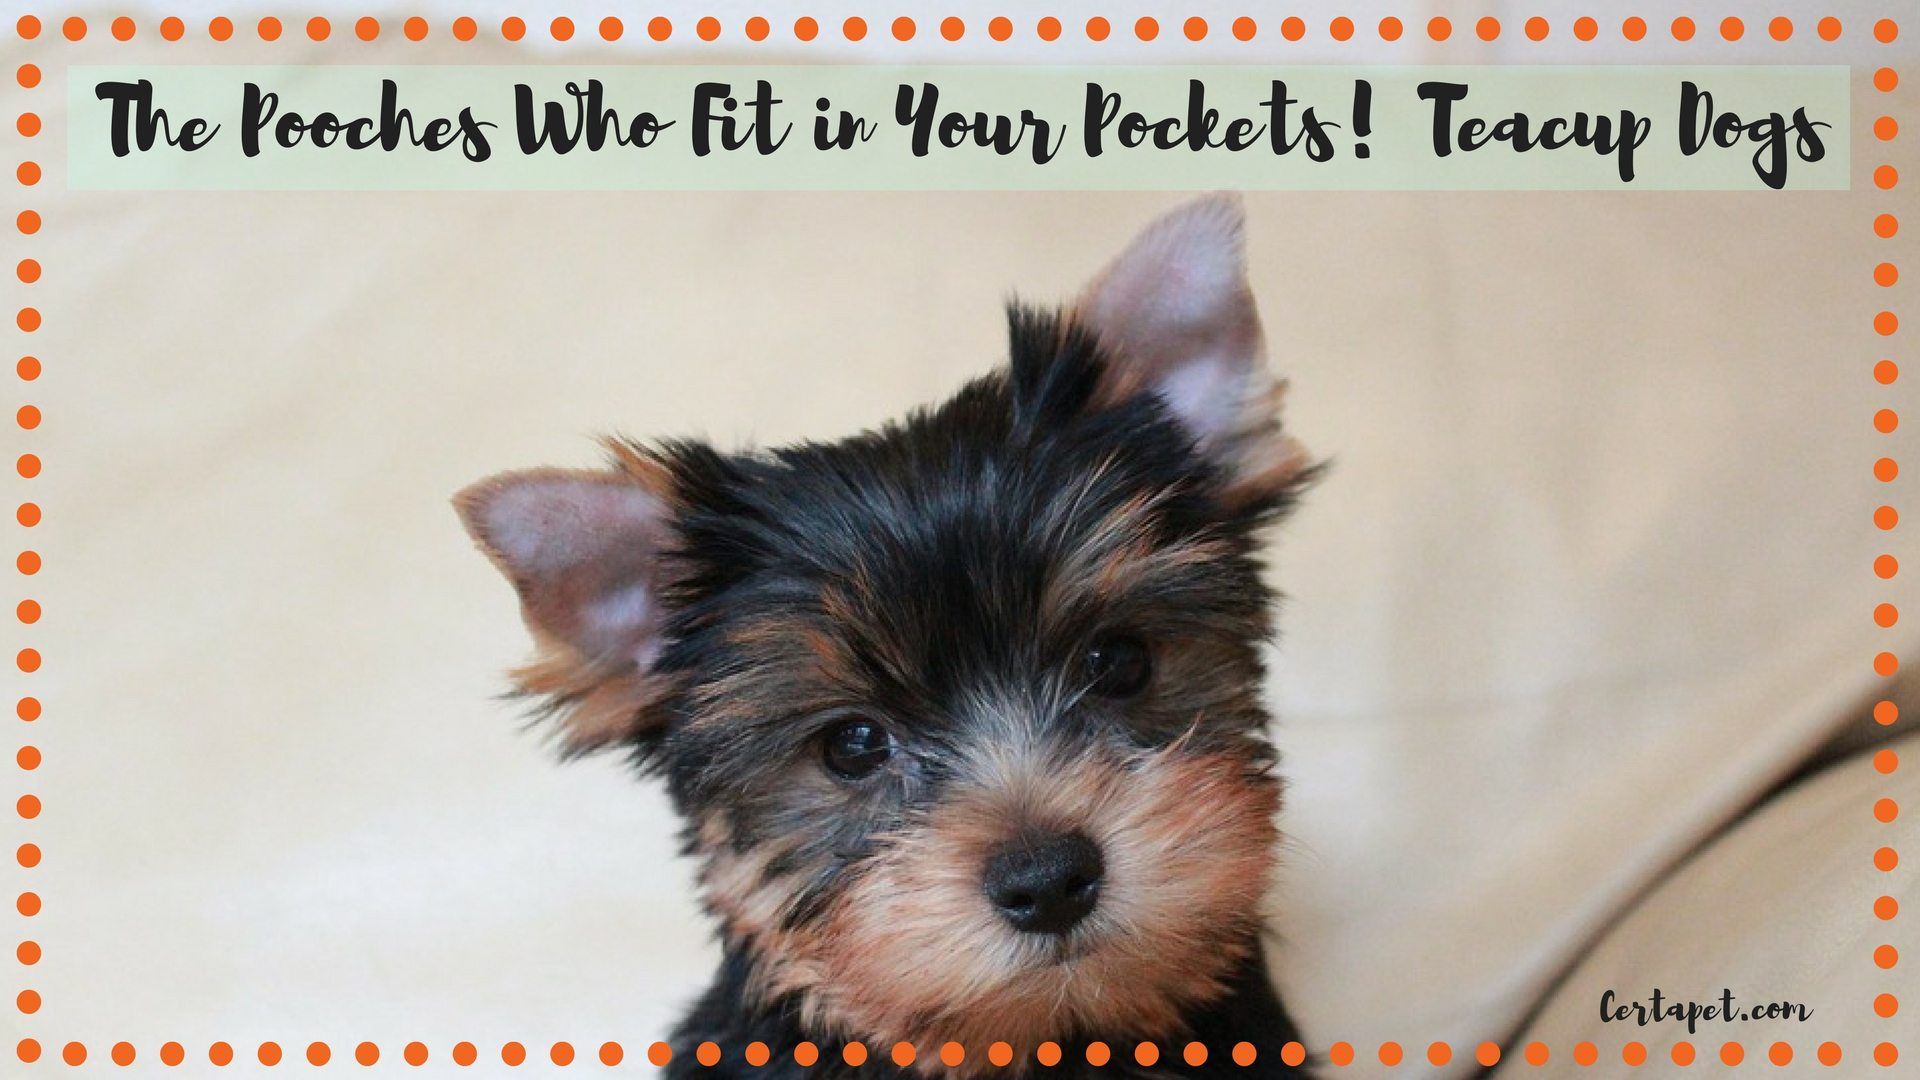 The Pooches Who Fit in Your Pockets! Teacup Dogs